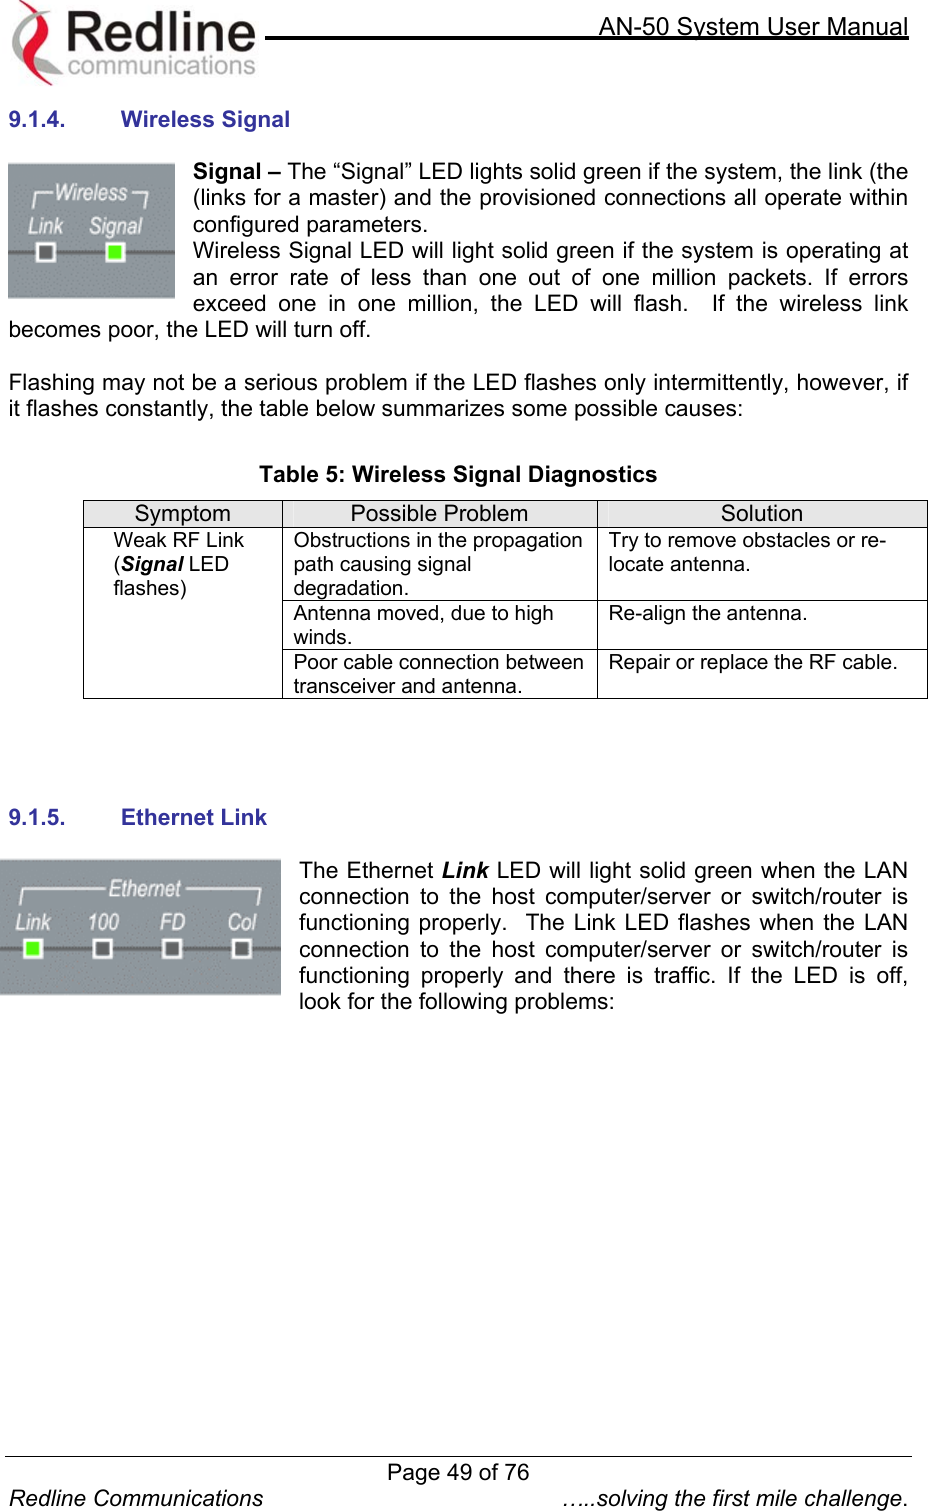     AN-50 System User Manual  Redline Communications  …..solving the first mile challenge. 9.1.4. Wireless Signal  Signal – The “Signal” LED lights solid green if the system, the link (the (links for a master) and the provisioned connections all operate within configured parameters.   Wireless Signal LED will light solid green if the system is operating at an error rate of less than one out of one million packets. If errors exceed one in one million, the LED will flash.  If the wireless link becomes poor, the LED will turn off.  Flashing may not be a serious problem if the LED flashes only intermittently, however, if it flashes constantly, the table below summarizes some possible causes:   Table 5: Wireless Signal Diagnostics Symptom  Possible Problem  Solution Obstructions in the propagation path causing signal degradation.  Try to remove obstacles or re-locate antenna.  Antenna moved, due to high winds. Re-align the antenna. Weak RF Link (Signal LED flashes) Poor cable connection between transceiver and antenna. Repair or replace the RF cable.     9.1.5. Ethernet Link  The Ethernet Link LED will light solid green when the LAN connection to the host computer/server or switch/router is functioning properly.  The Link LED flashes when the LAN connection to the host computer/server or switch/router is functioning properly and there is traffic. If the LED is off, look for the following problems:  Page 49 of 76